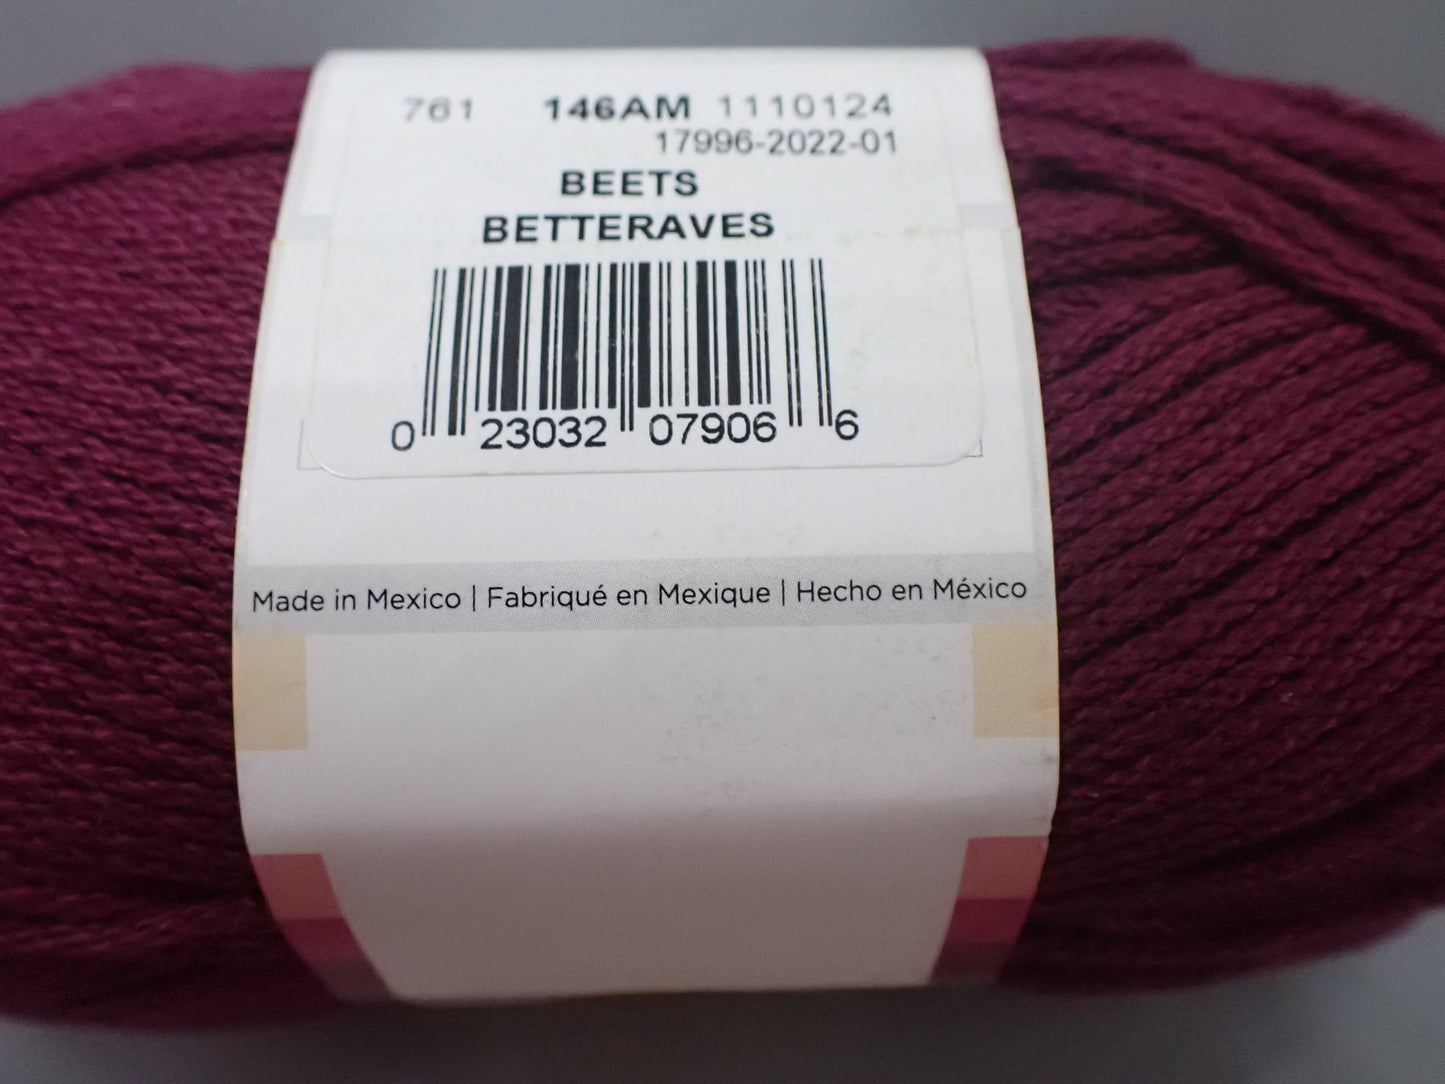 Lion Brand Yarns Worsted weight 24/7 Cotton Yarn Beets